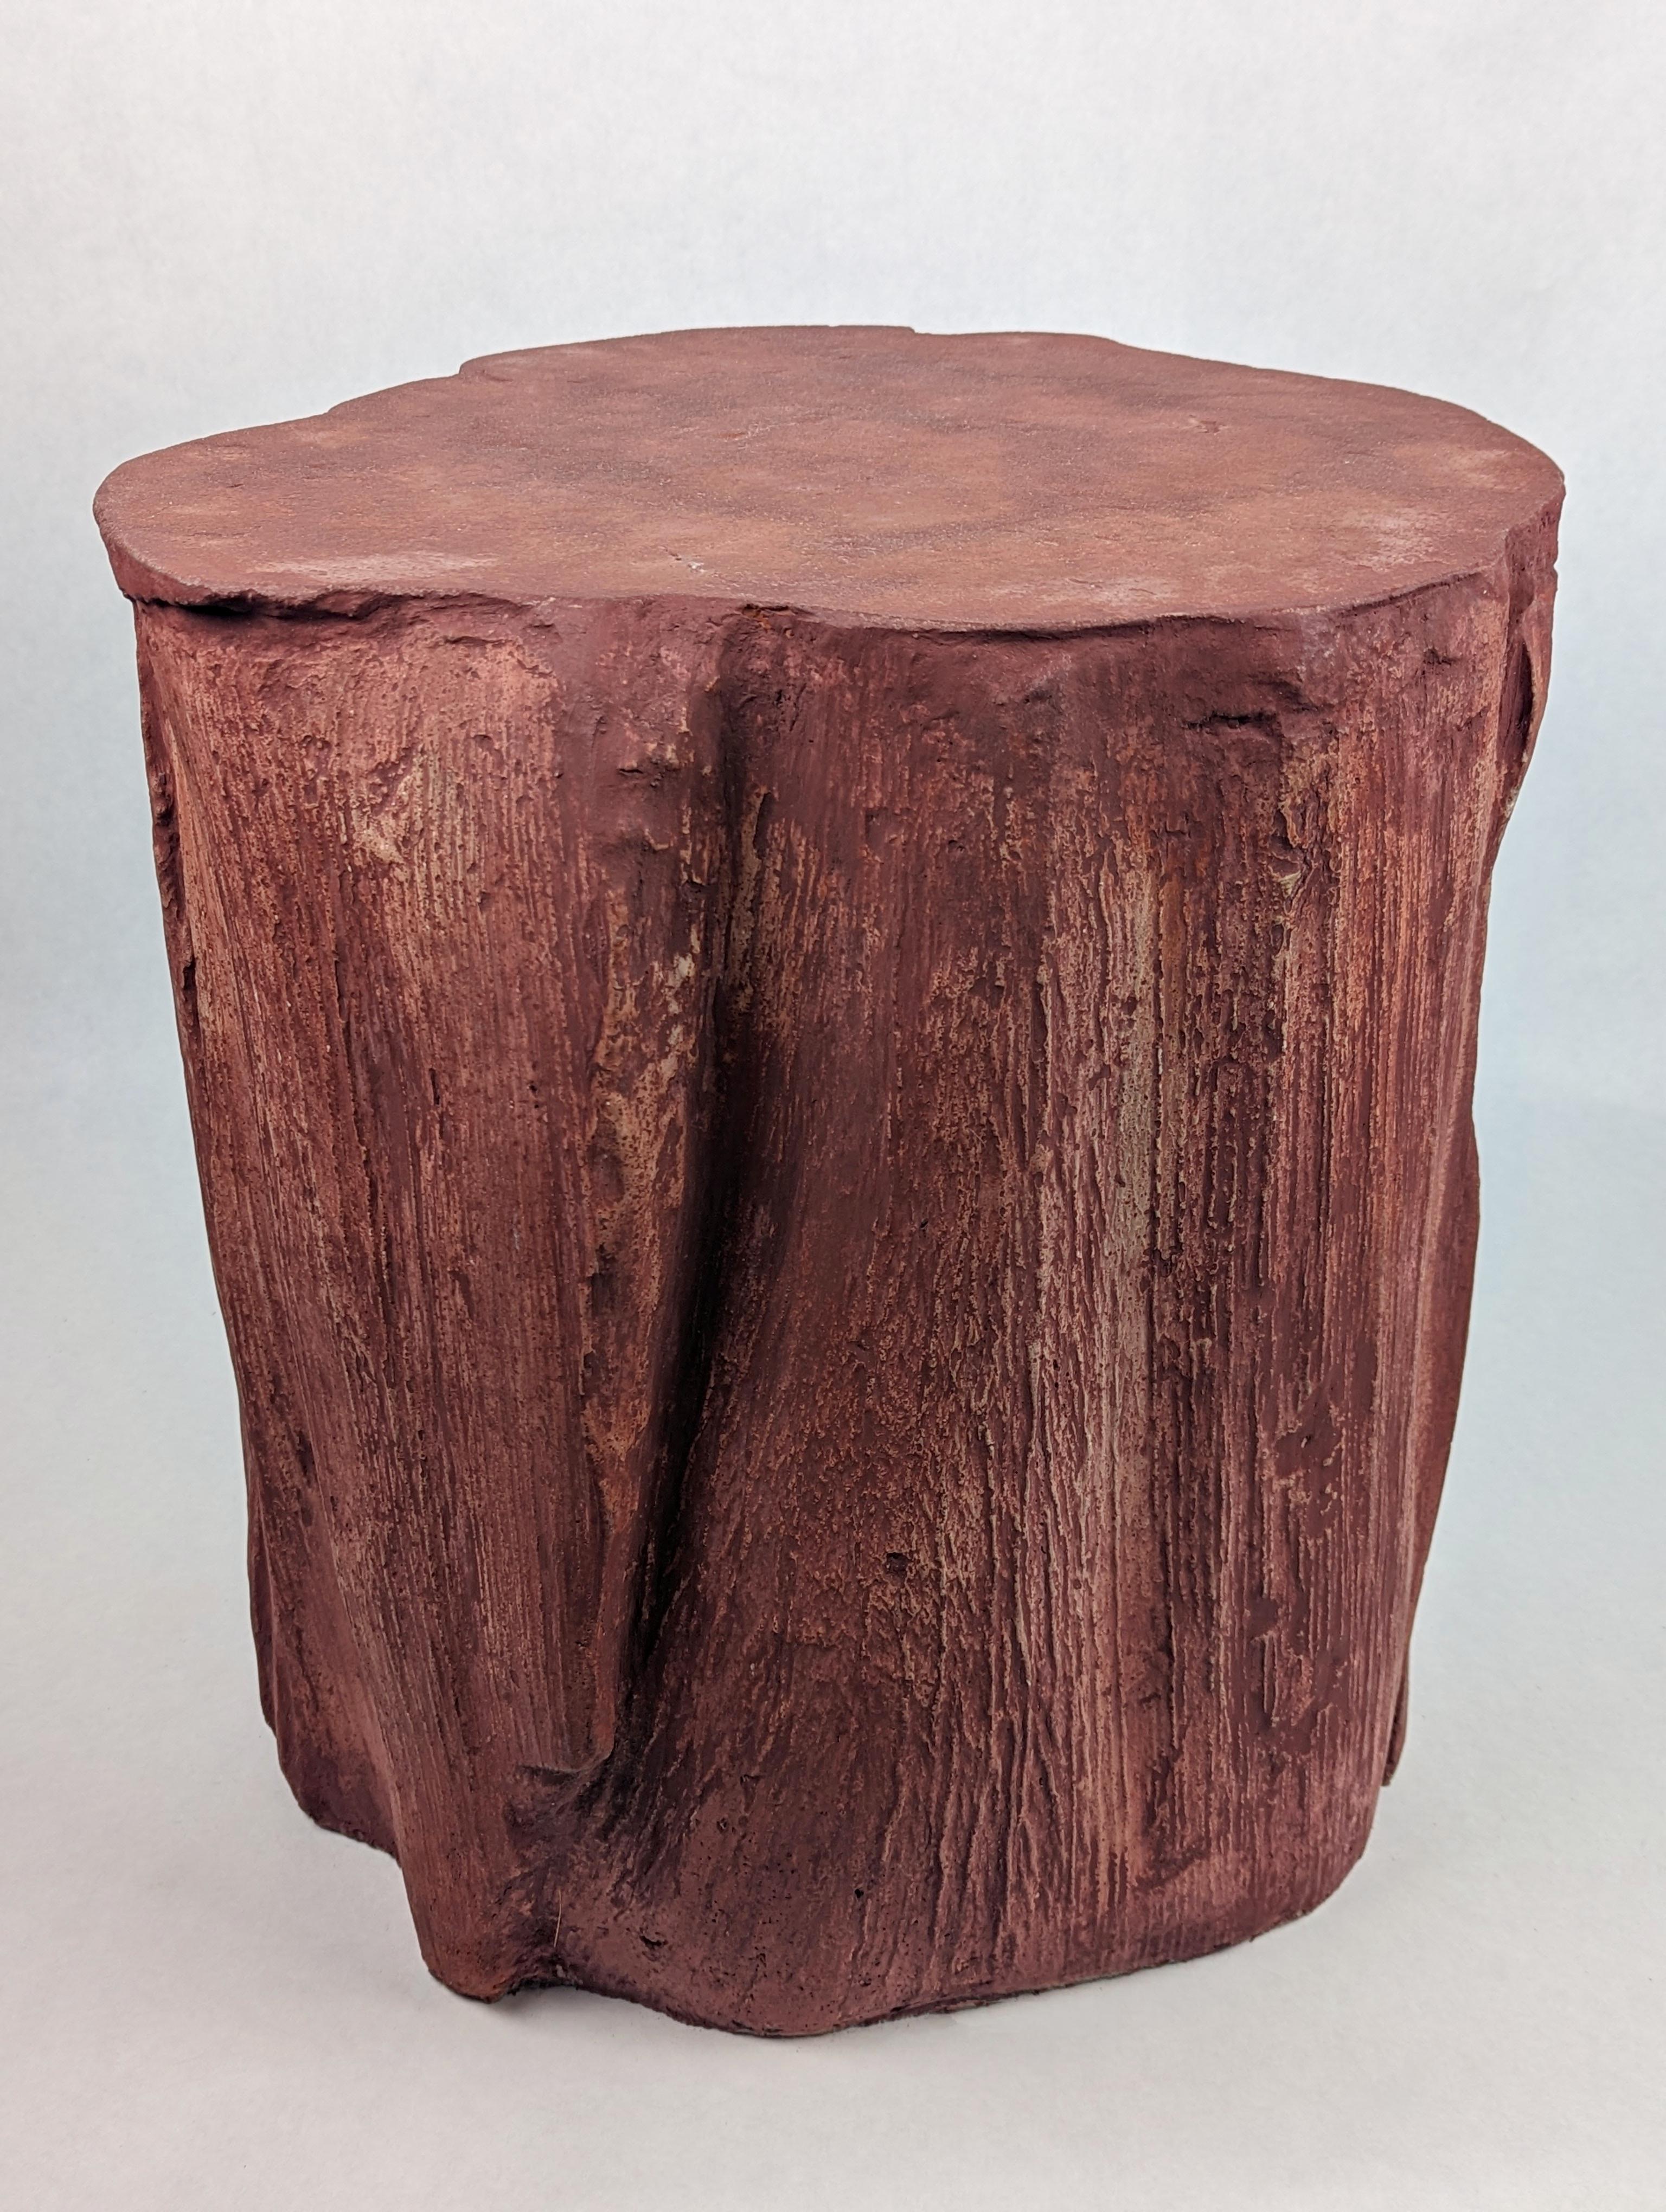 Contemporary Organic Modern Concrete Palm Stump Side Table For Sale